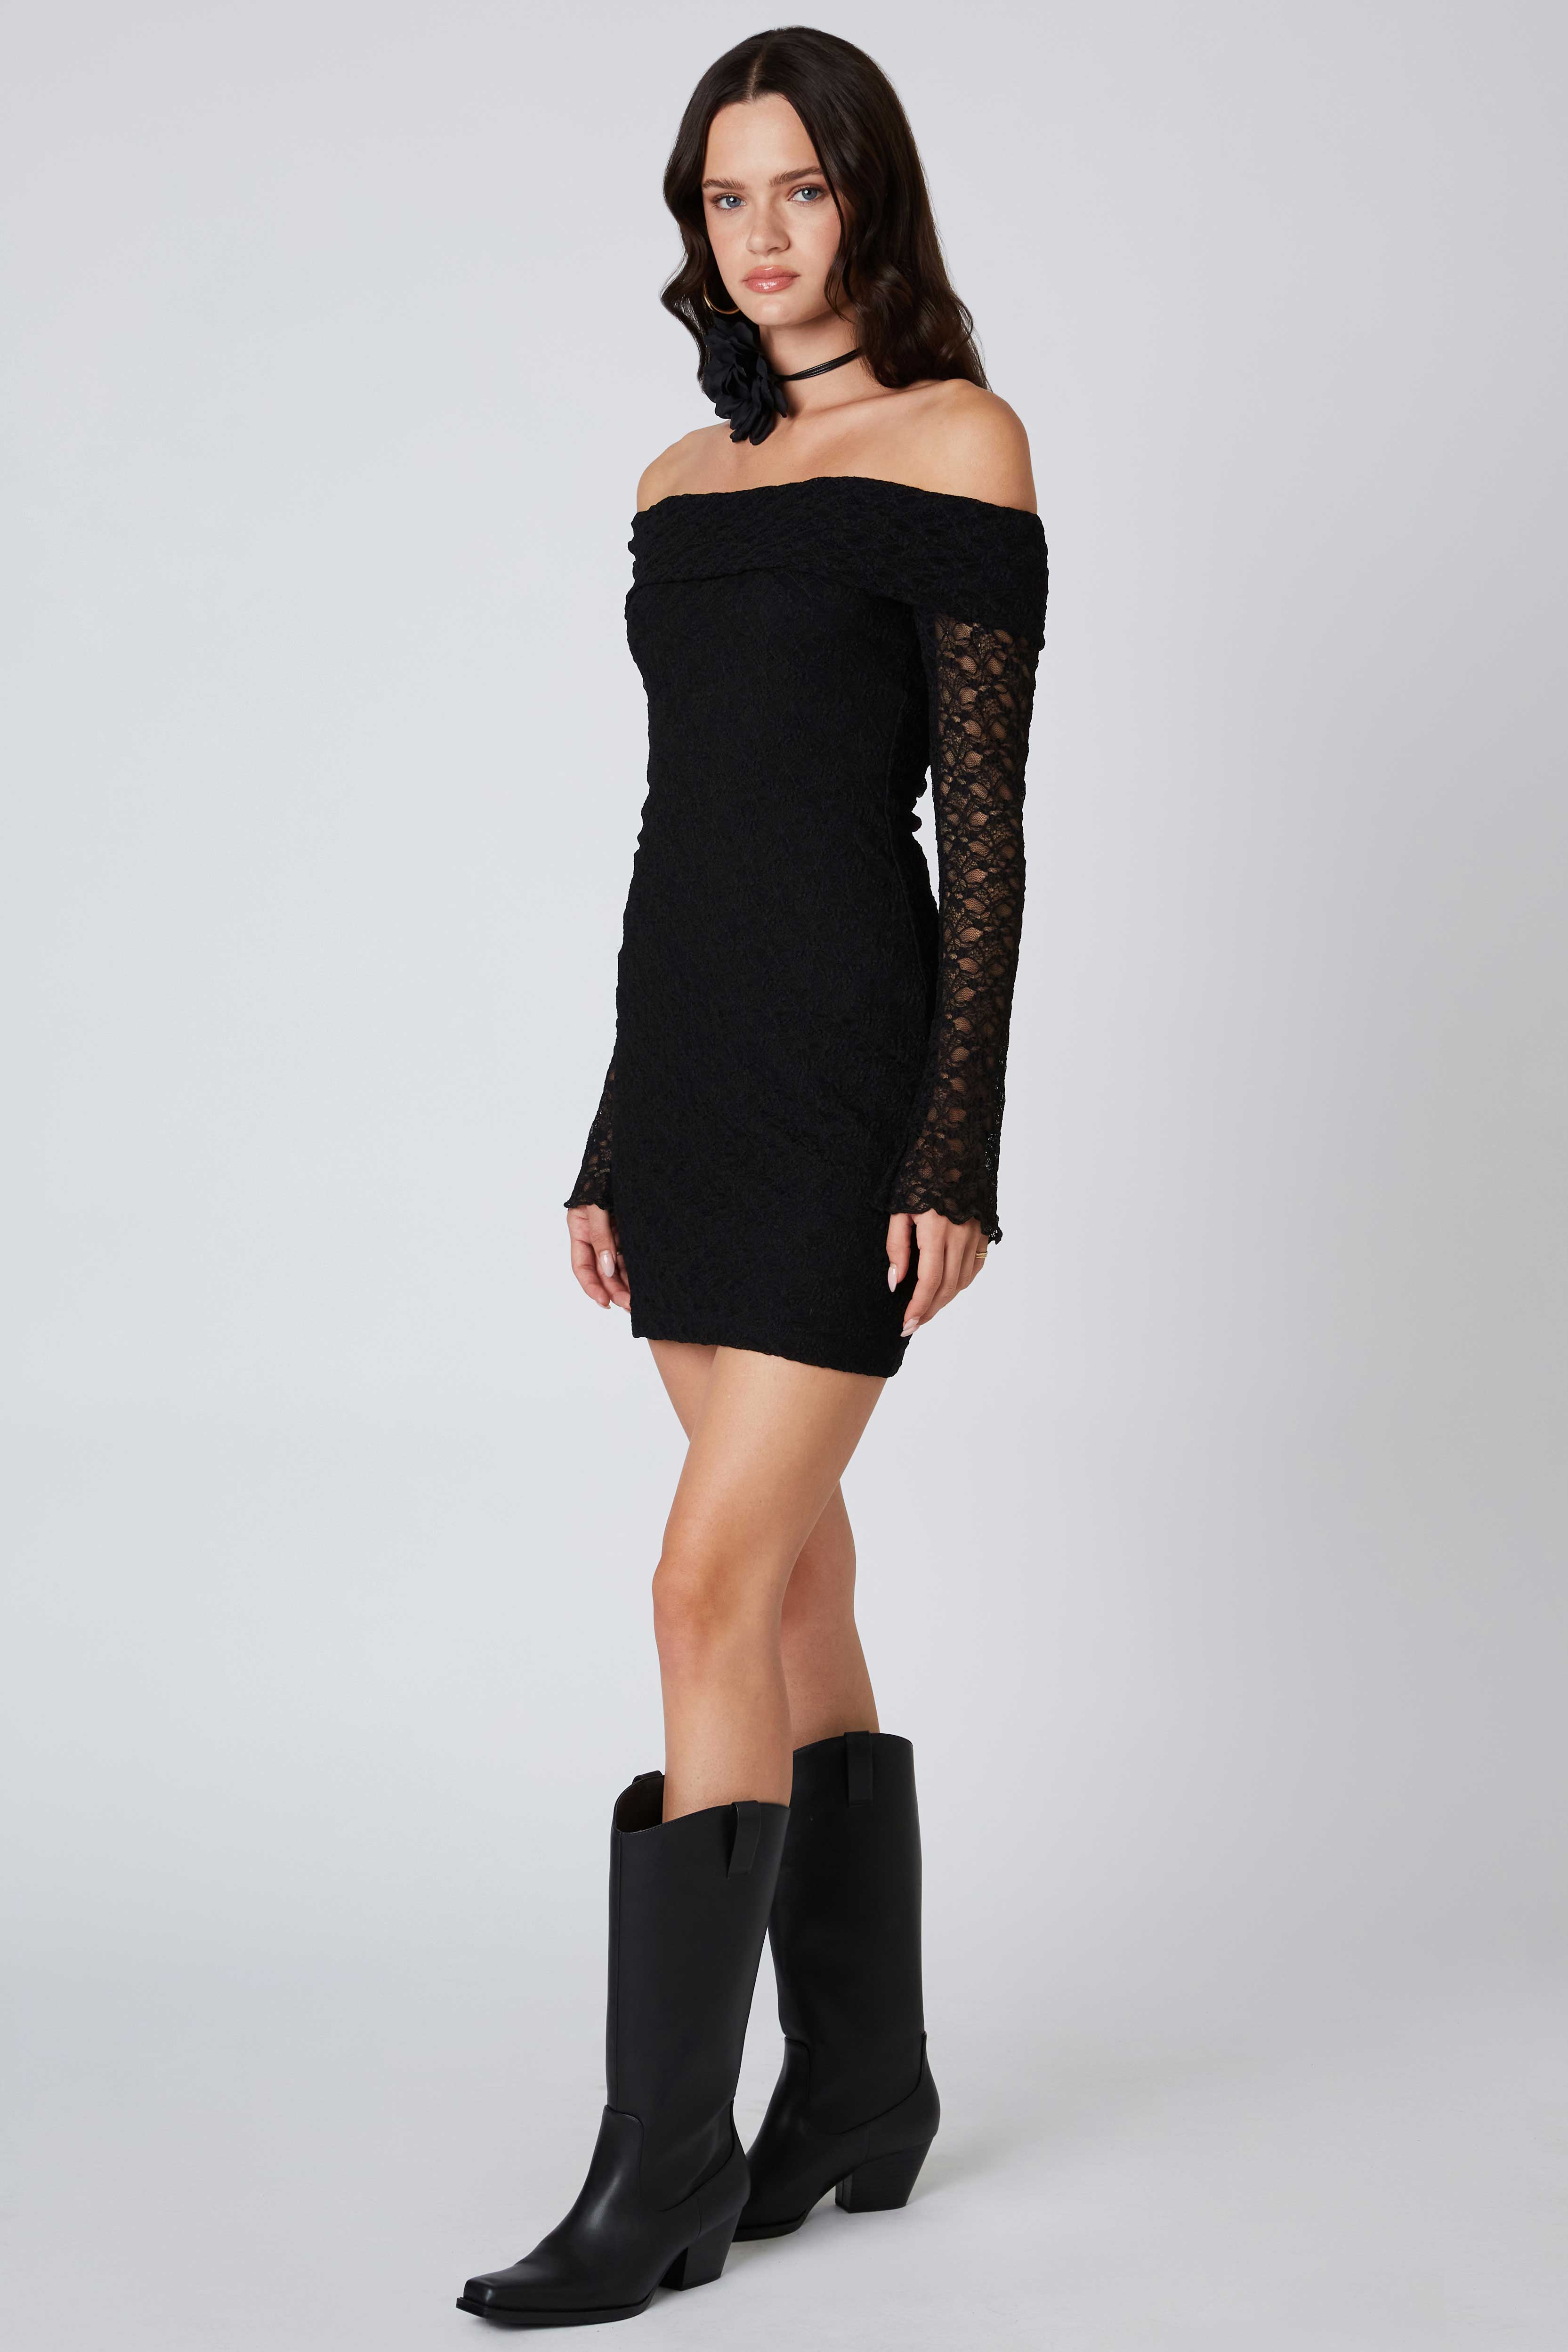 Off the Shoulder Lace Mini Dress in Black Side View